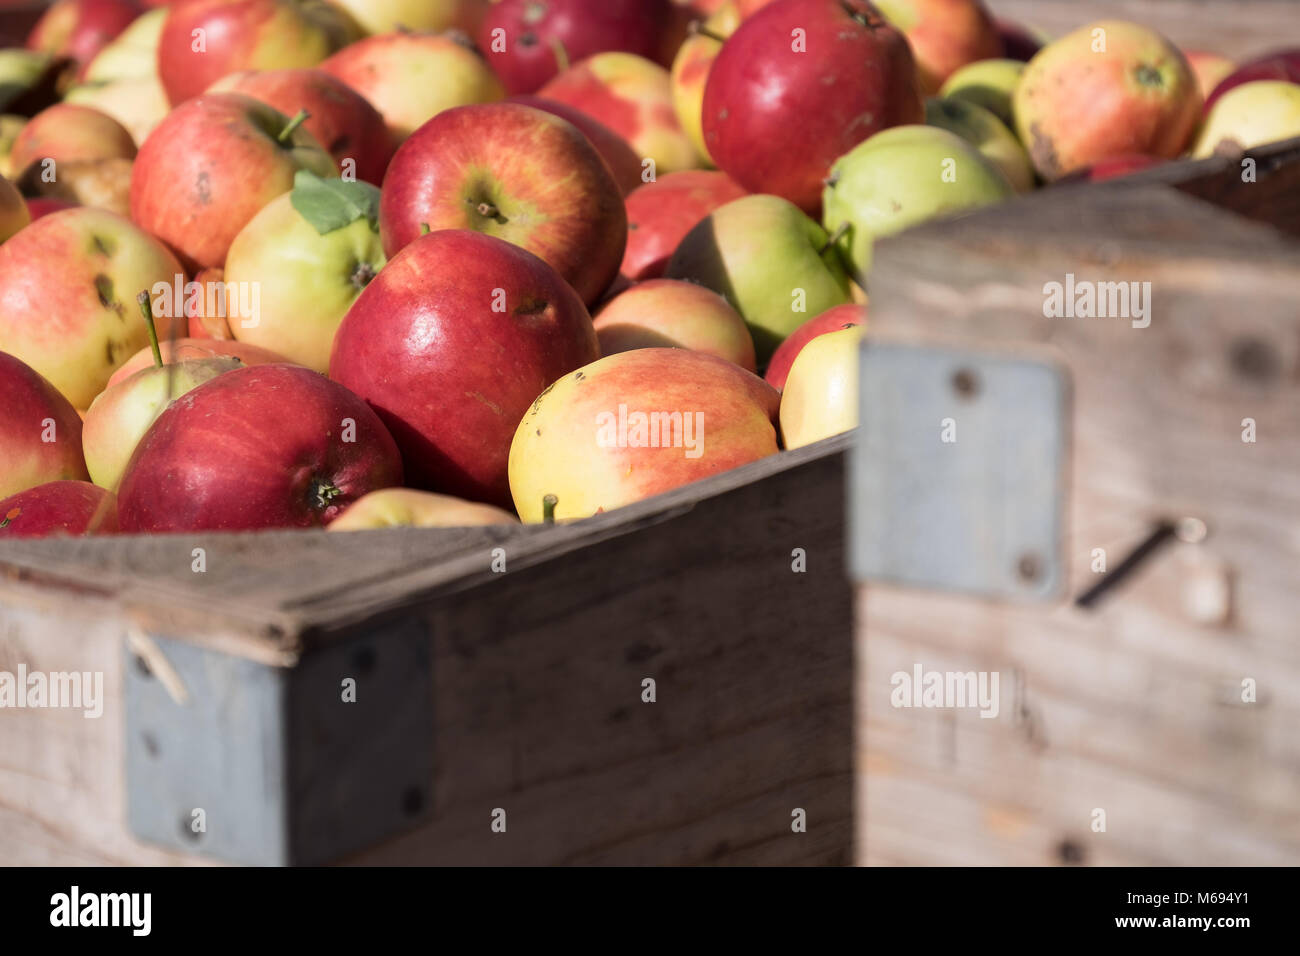 Apples in wooden box during harvest Stock Photo